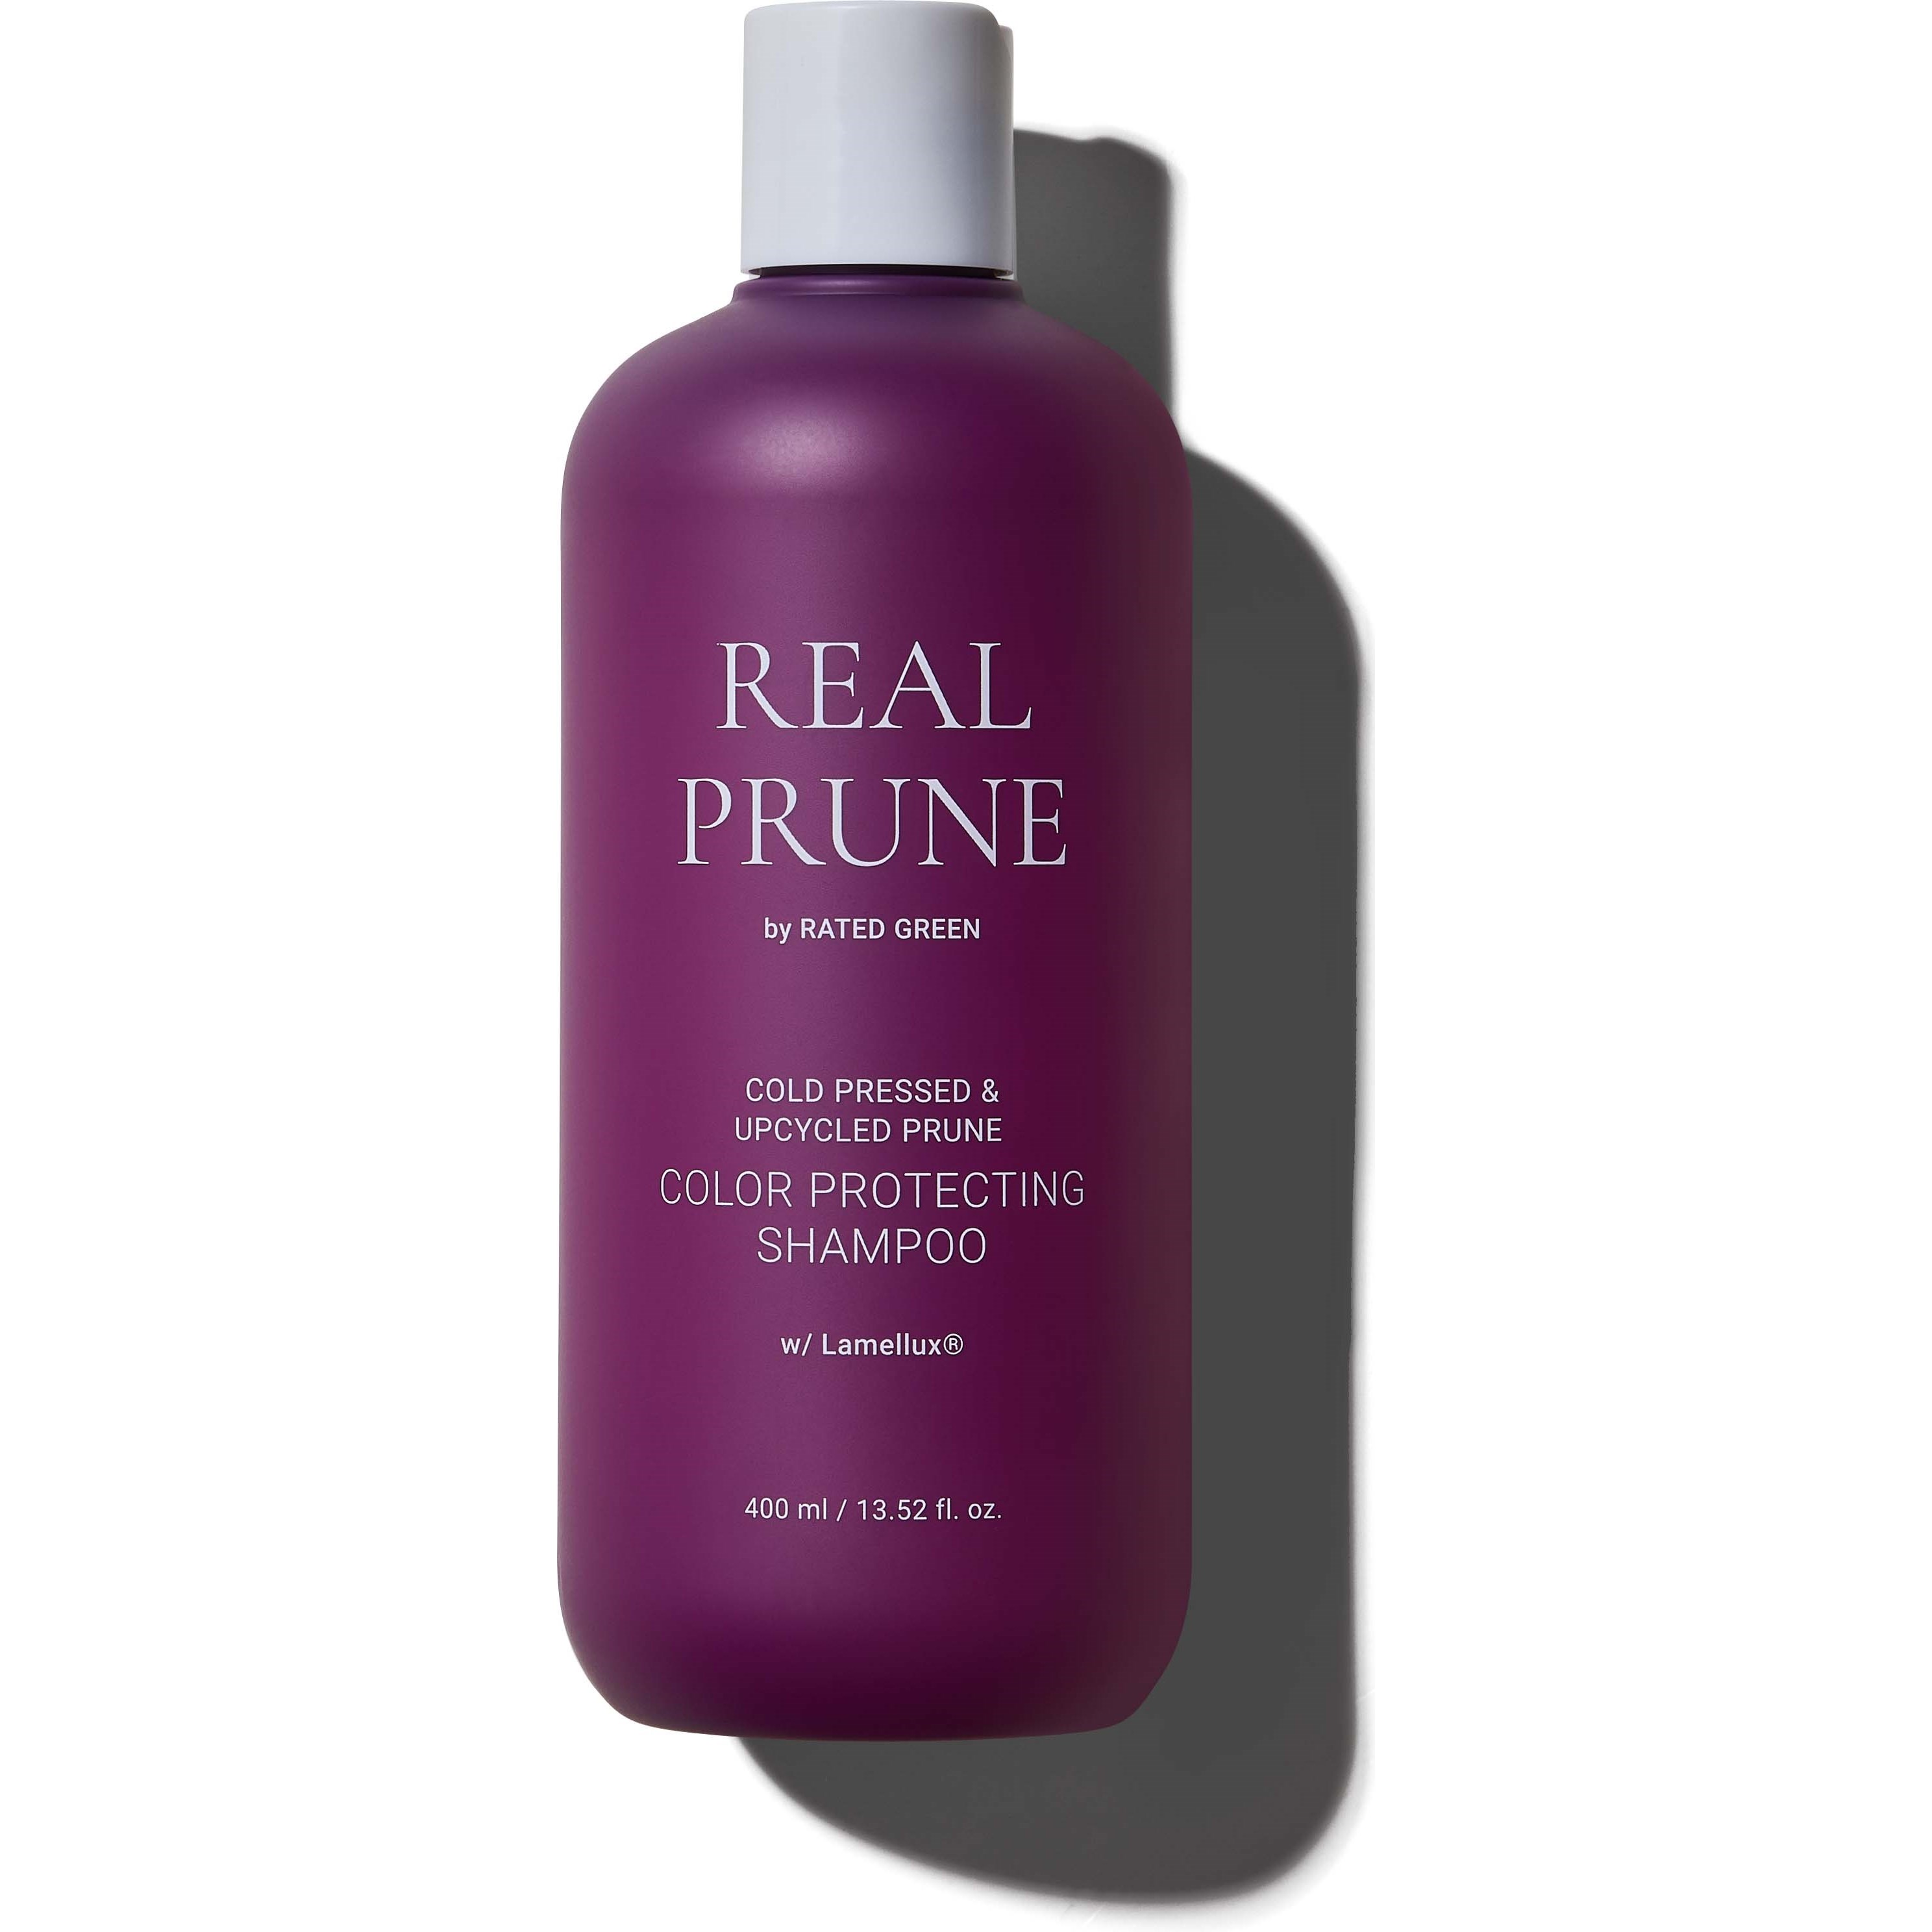 Rated Green Real Prune Cold Pressed & Upcycled Prune Color Protec